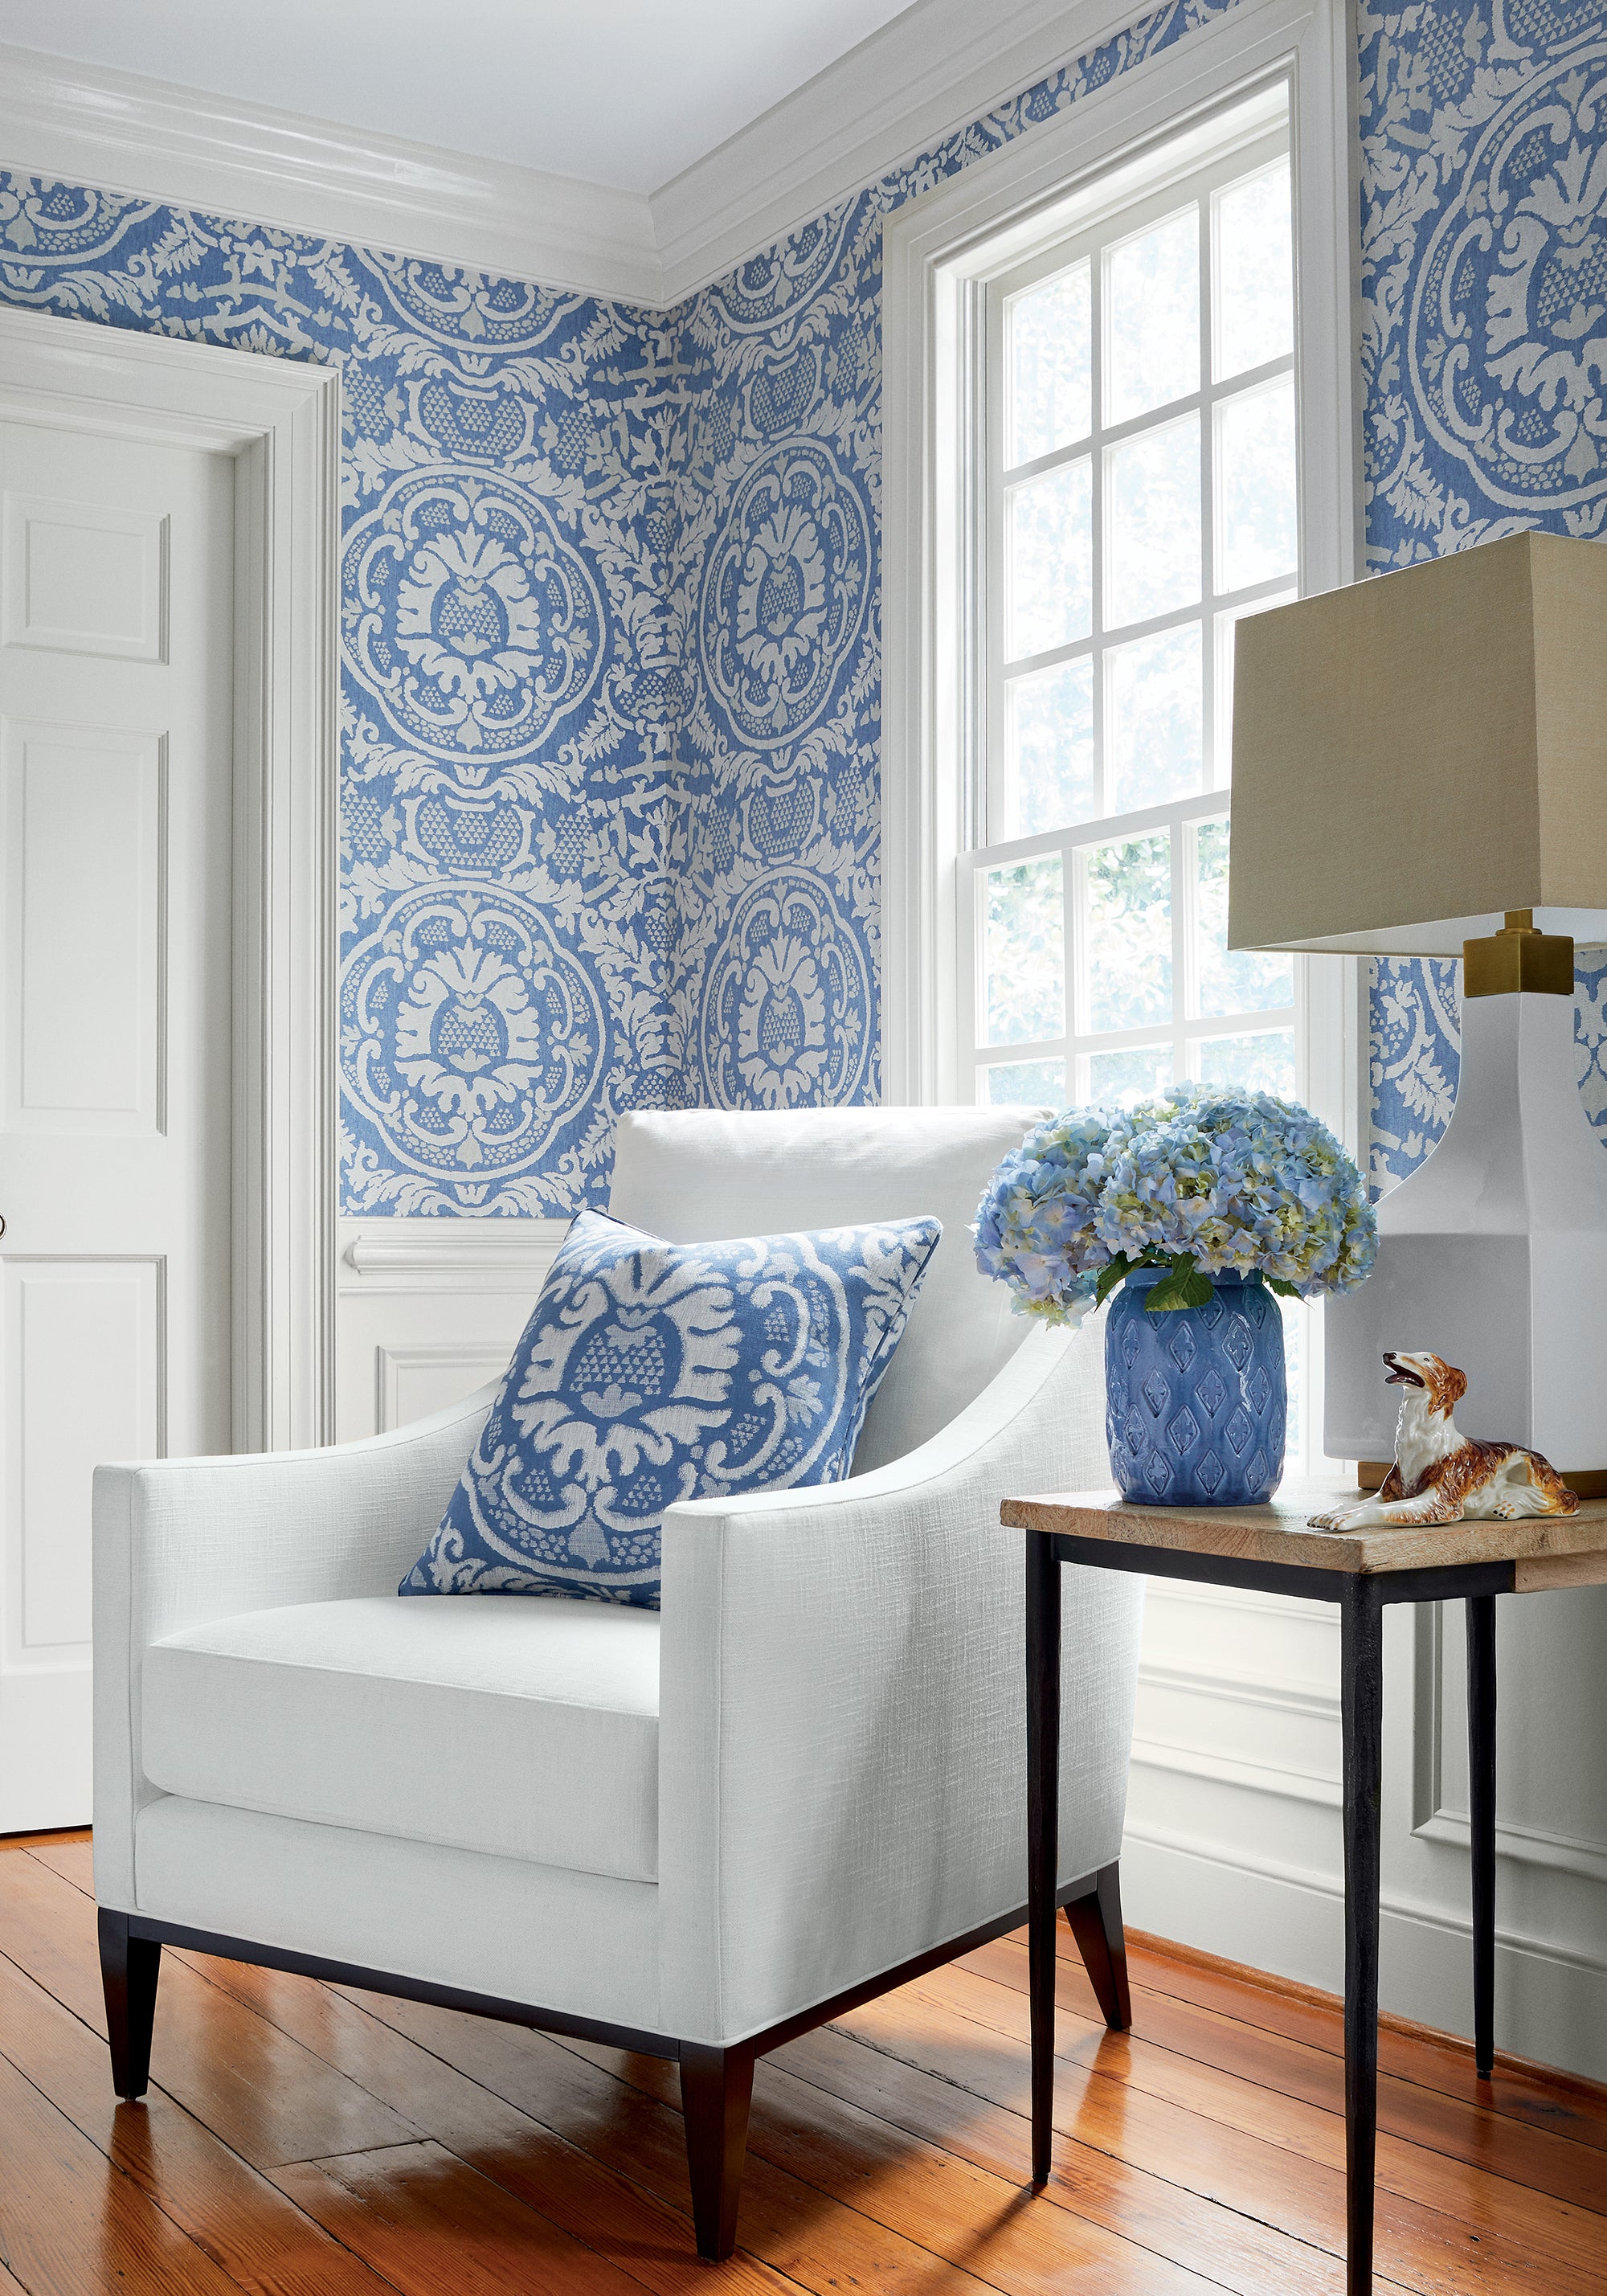 Pillow in Earl Damask woven fabric in blue color amongst blue and white motif - pattern number W710837 by Thibaut in the Heritage collection